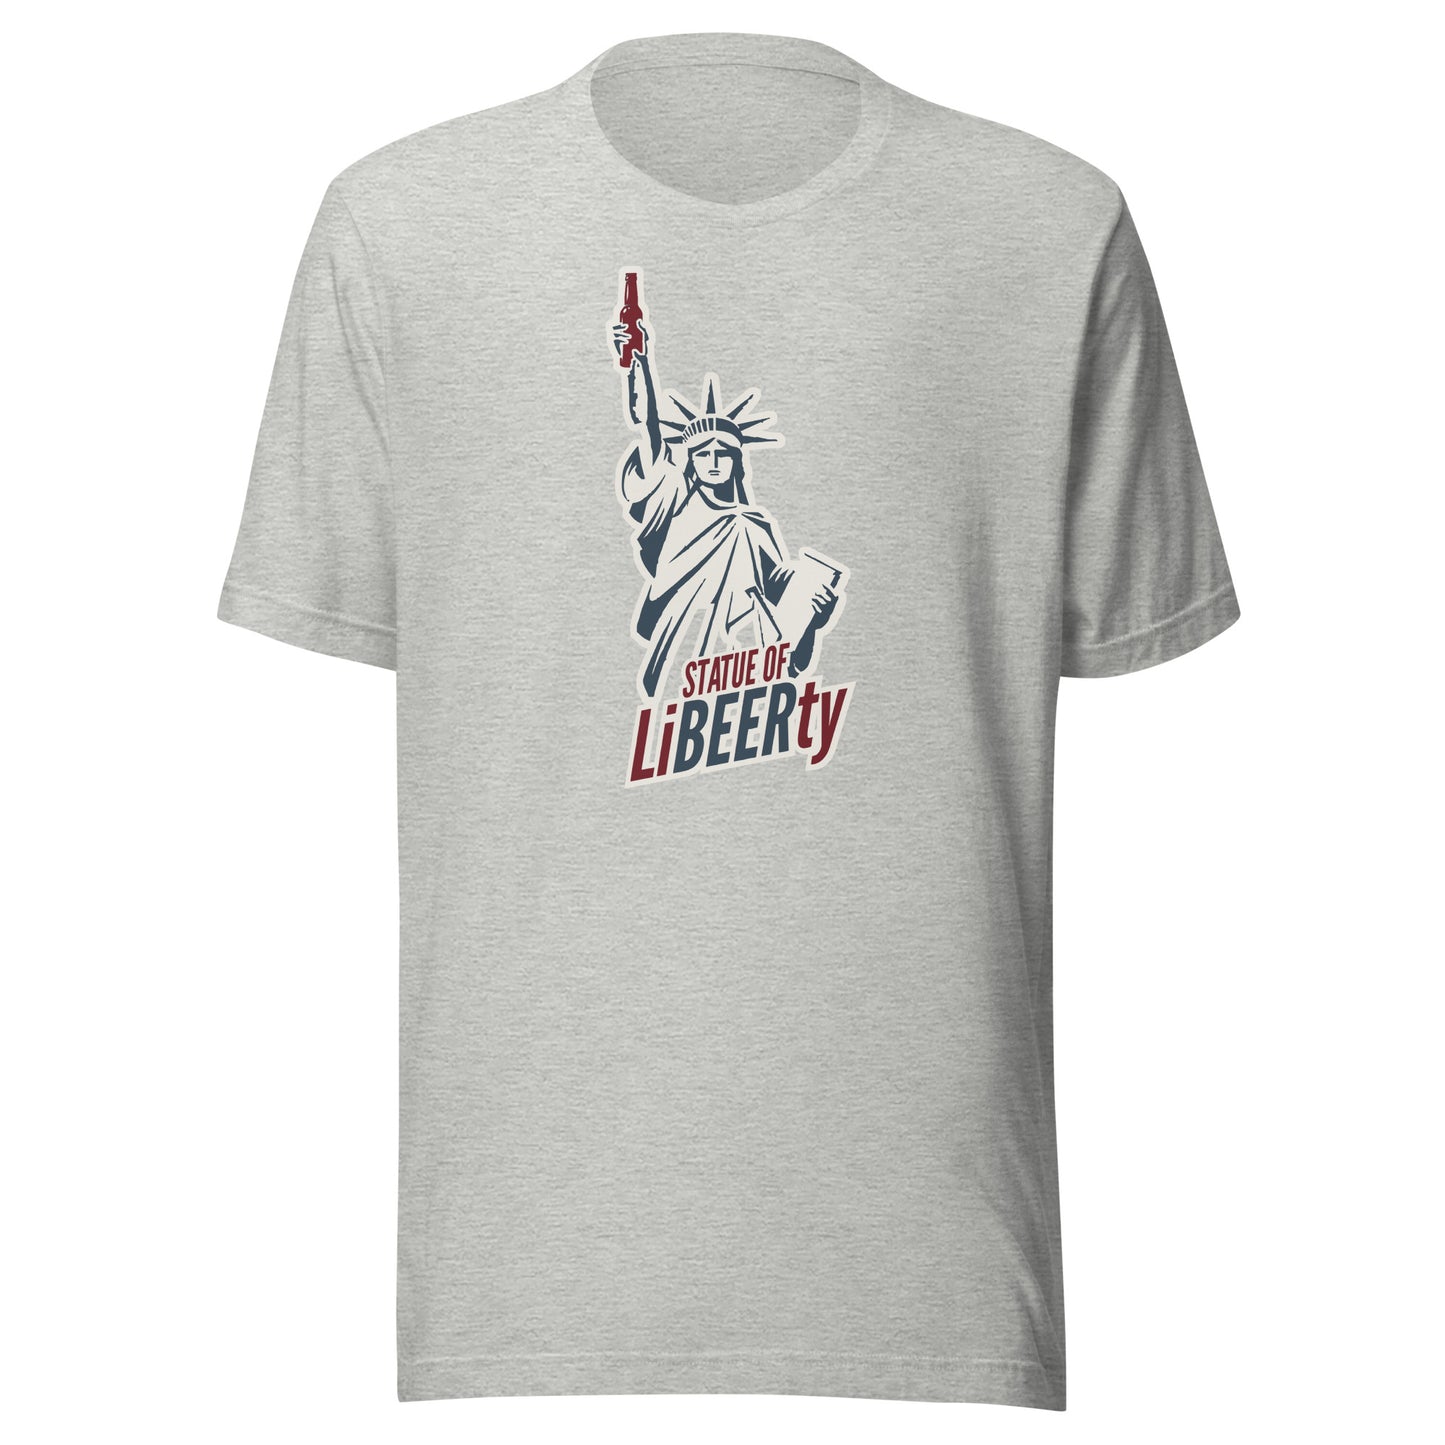 T-Shirt - Statue of LiBEERty